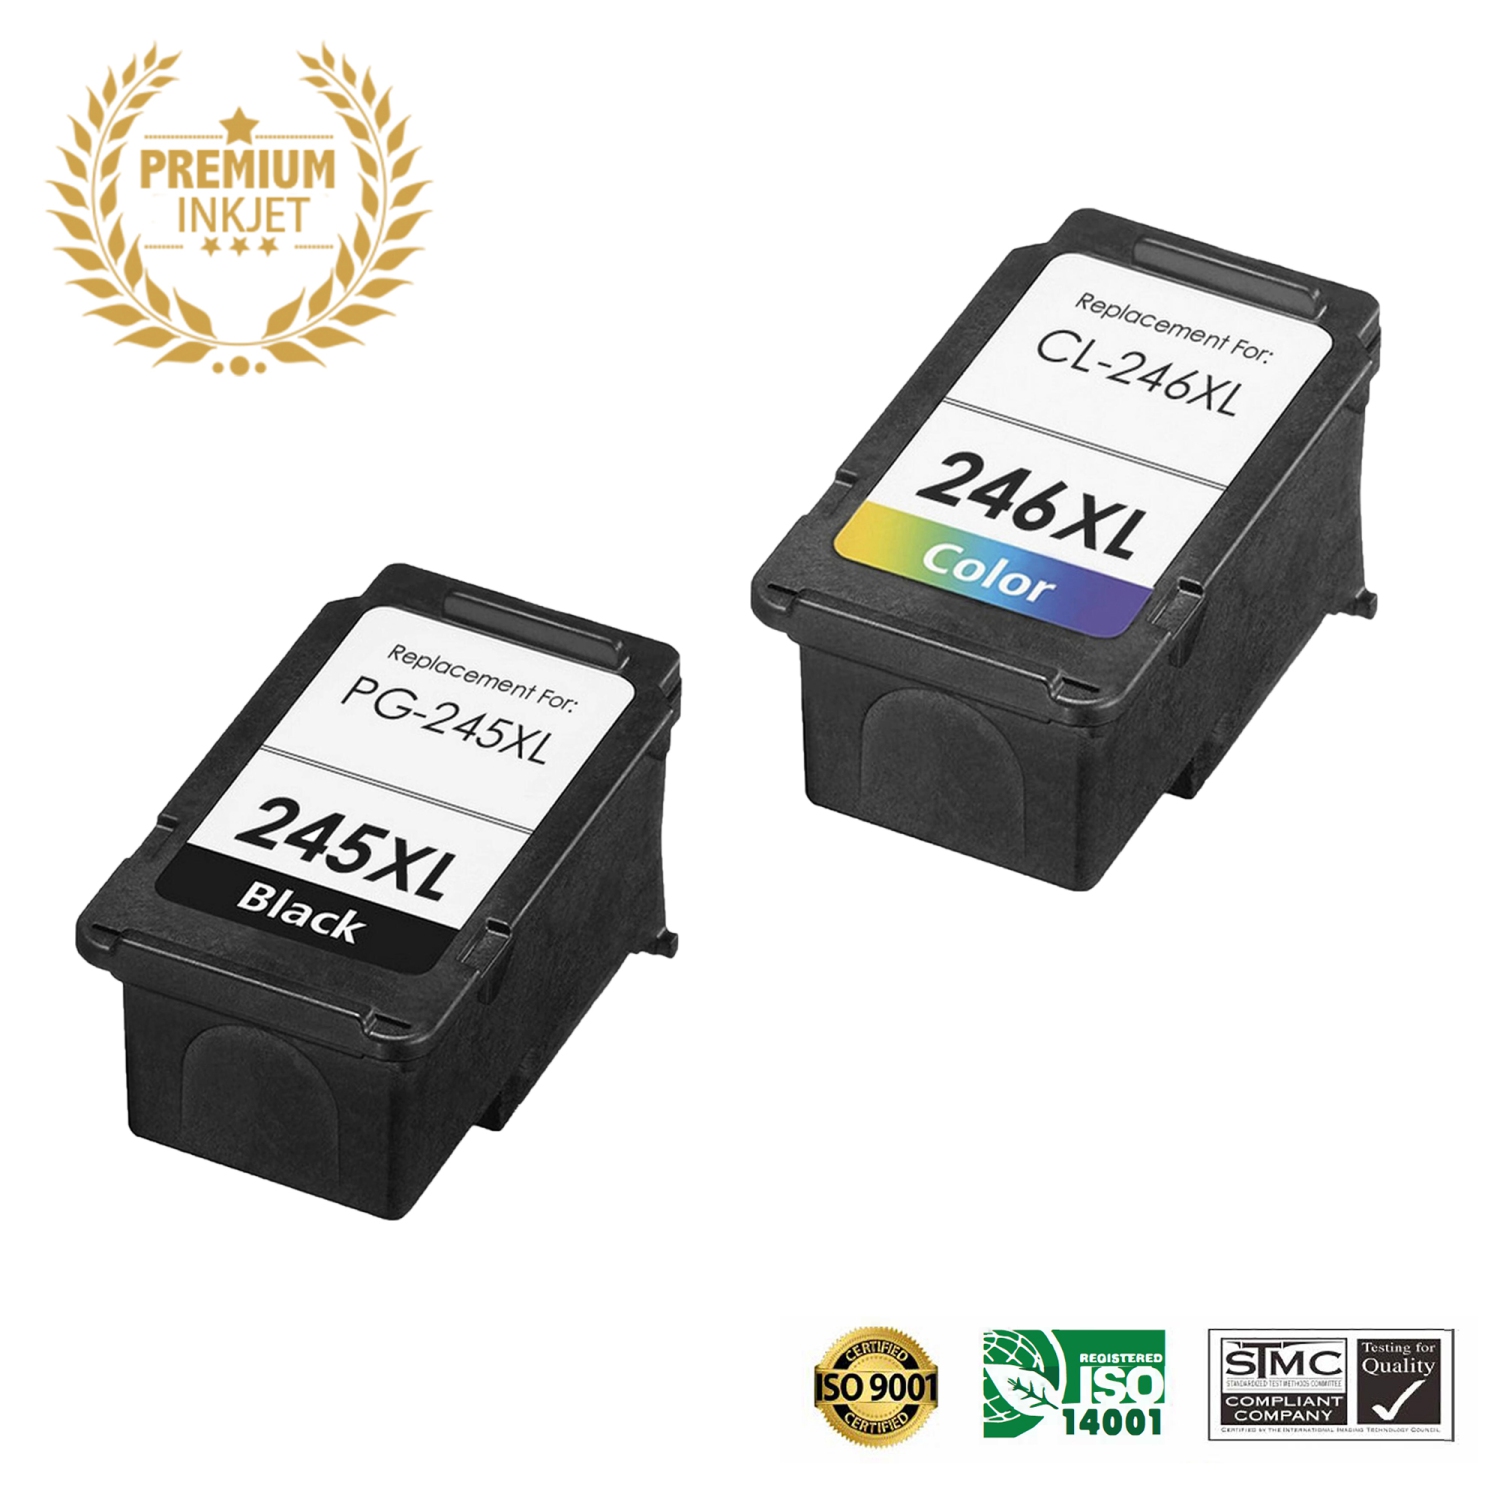 1 Set Canon PG-245XL CL-246XL/PG245 CL246/canon 245 246 Remanufactured Ink Cartridge for Canon MG2520 TR4520 TR4500 TS302